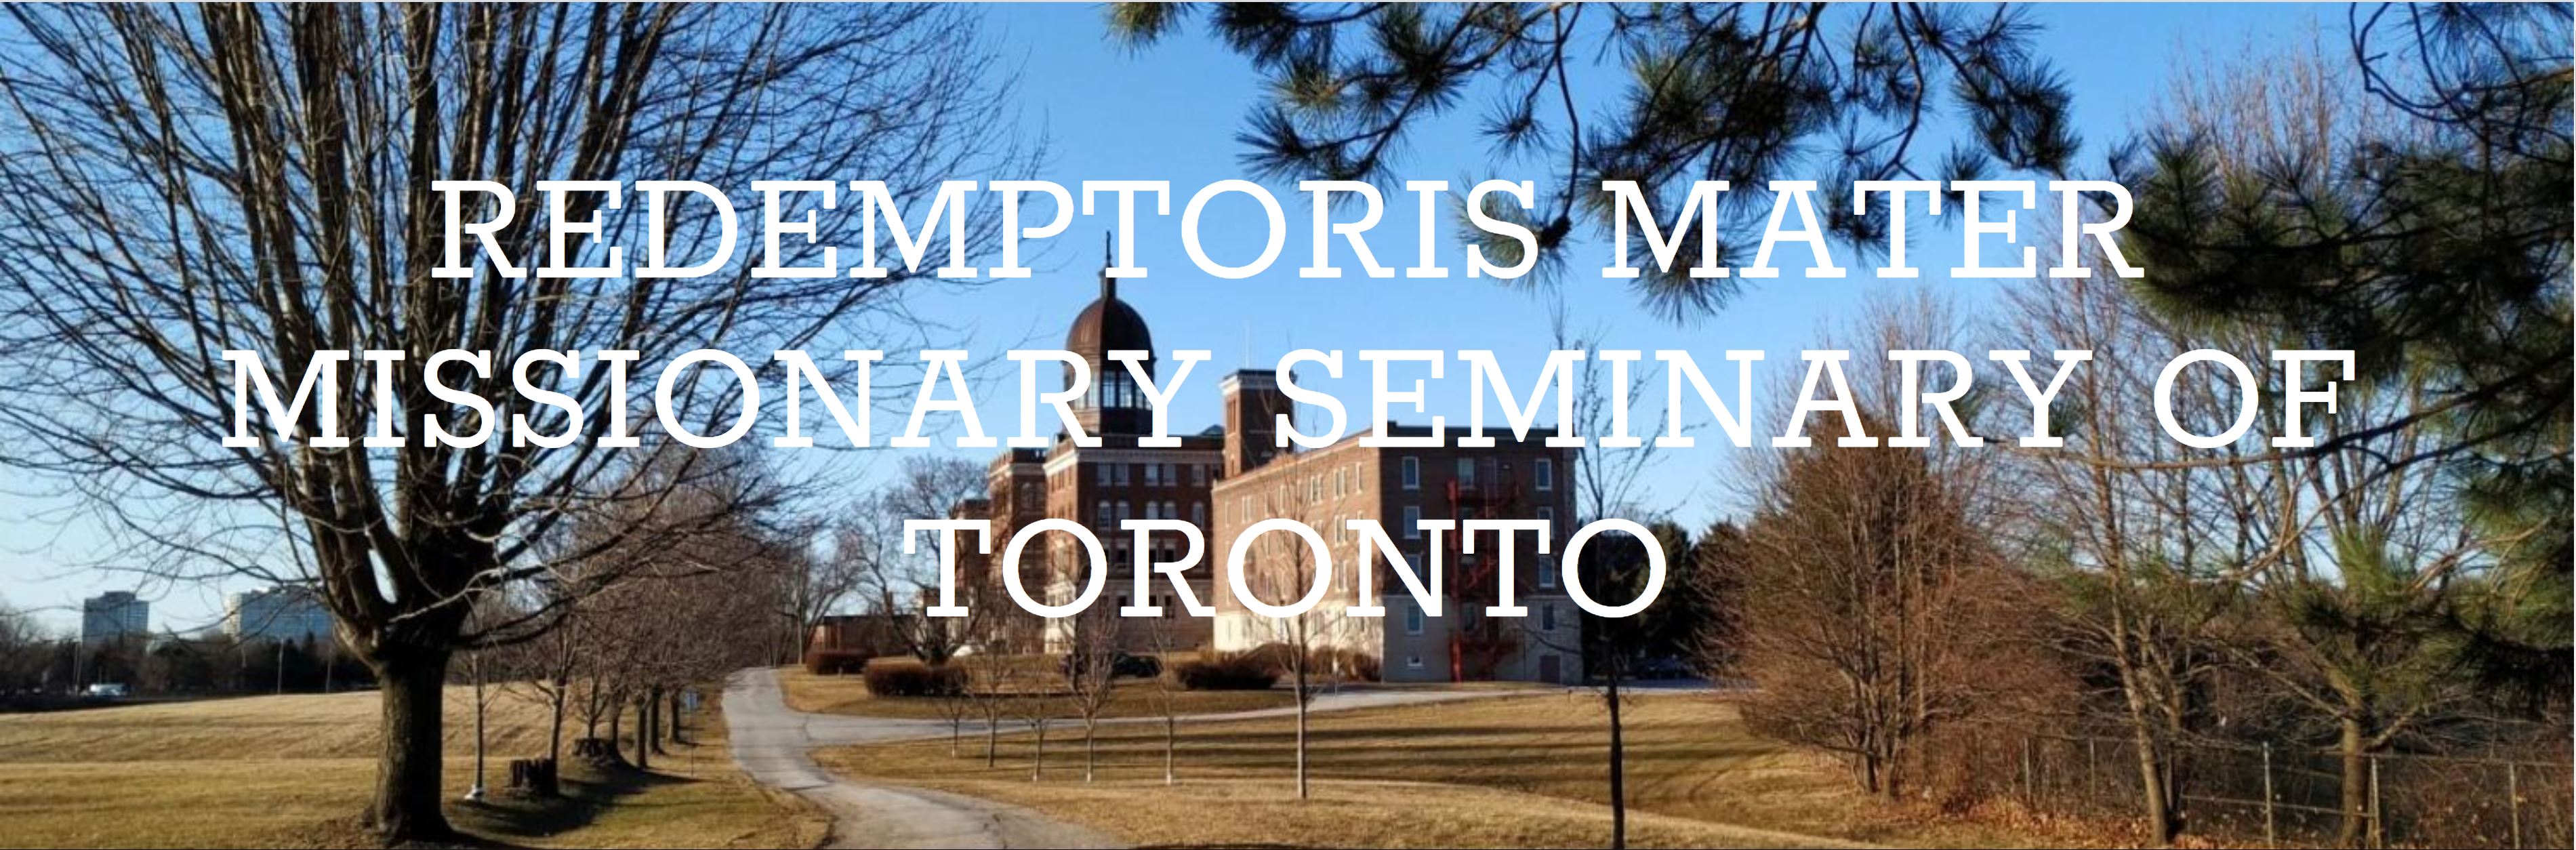 REDEMPTORIS MATER MISSIONARY SEMINARY, ARCHDIOCESE OF TORONTO logo